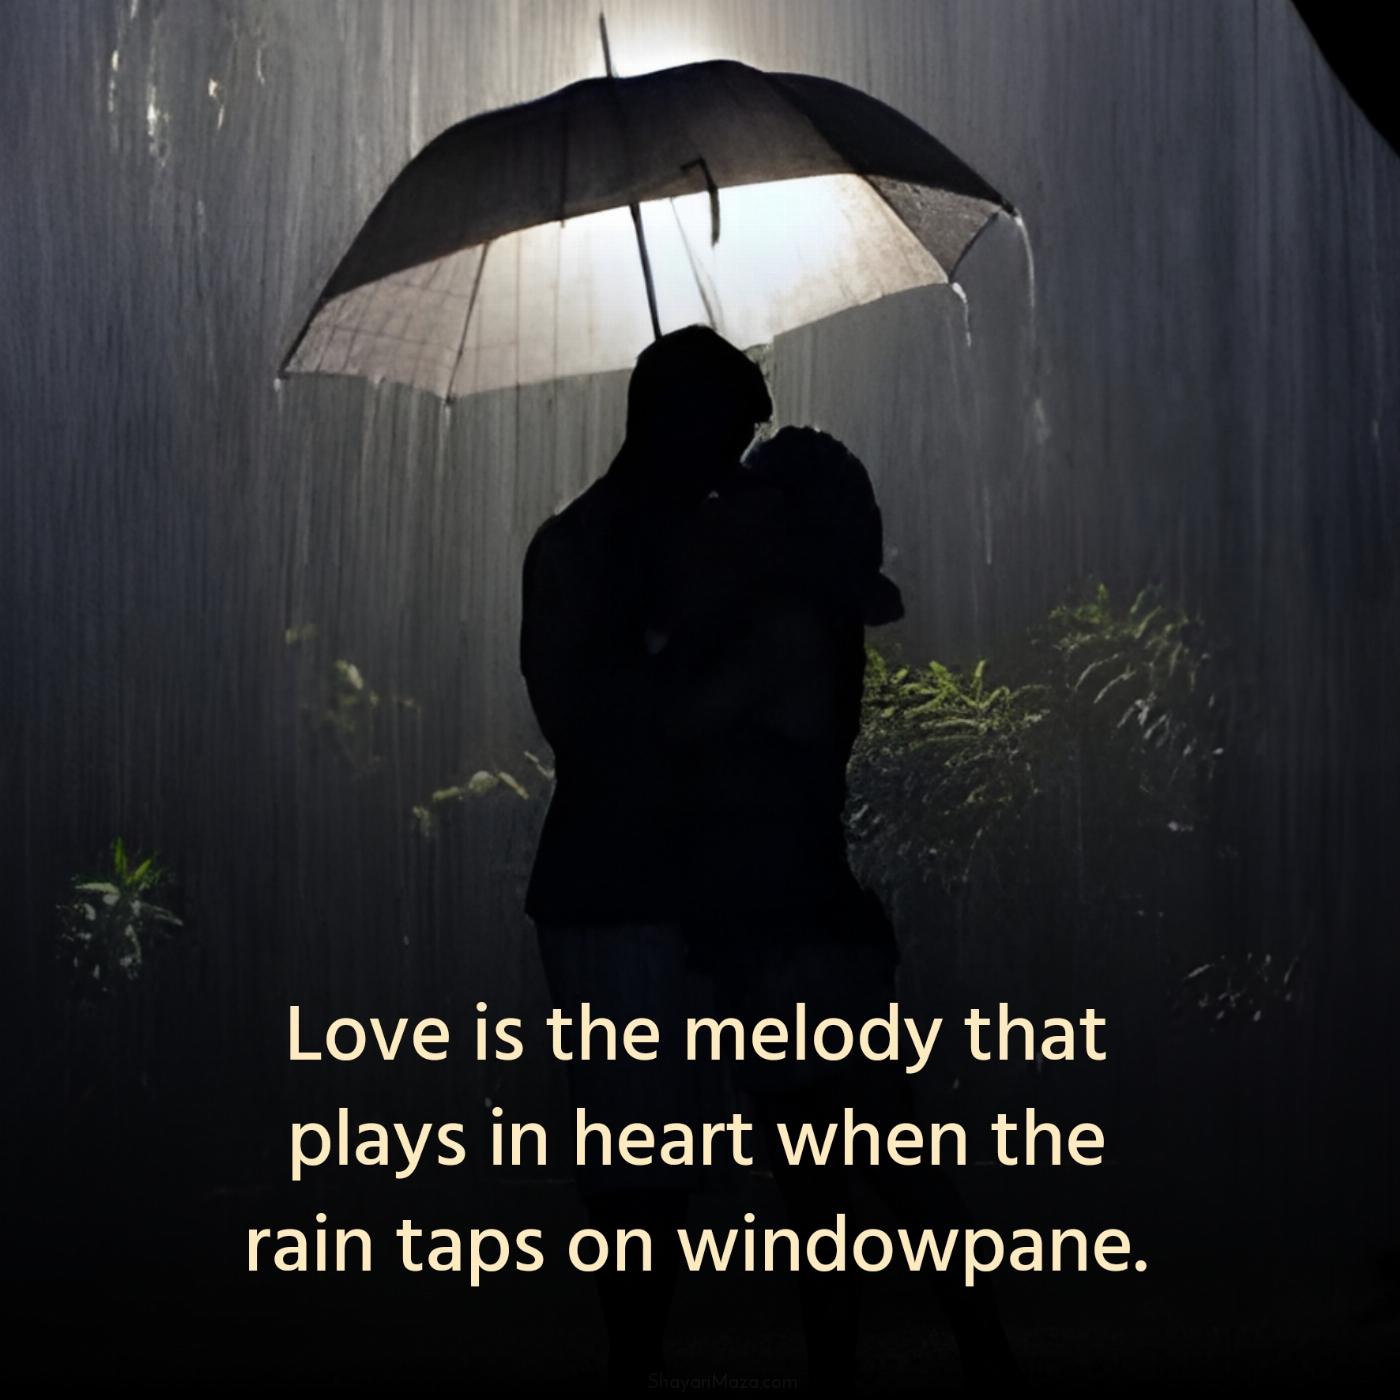 Love is the melody that plays in heart when the rain taps on windowpane